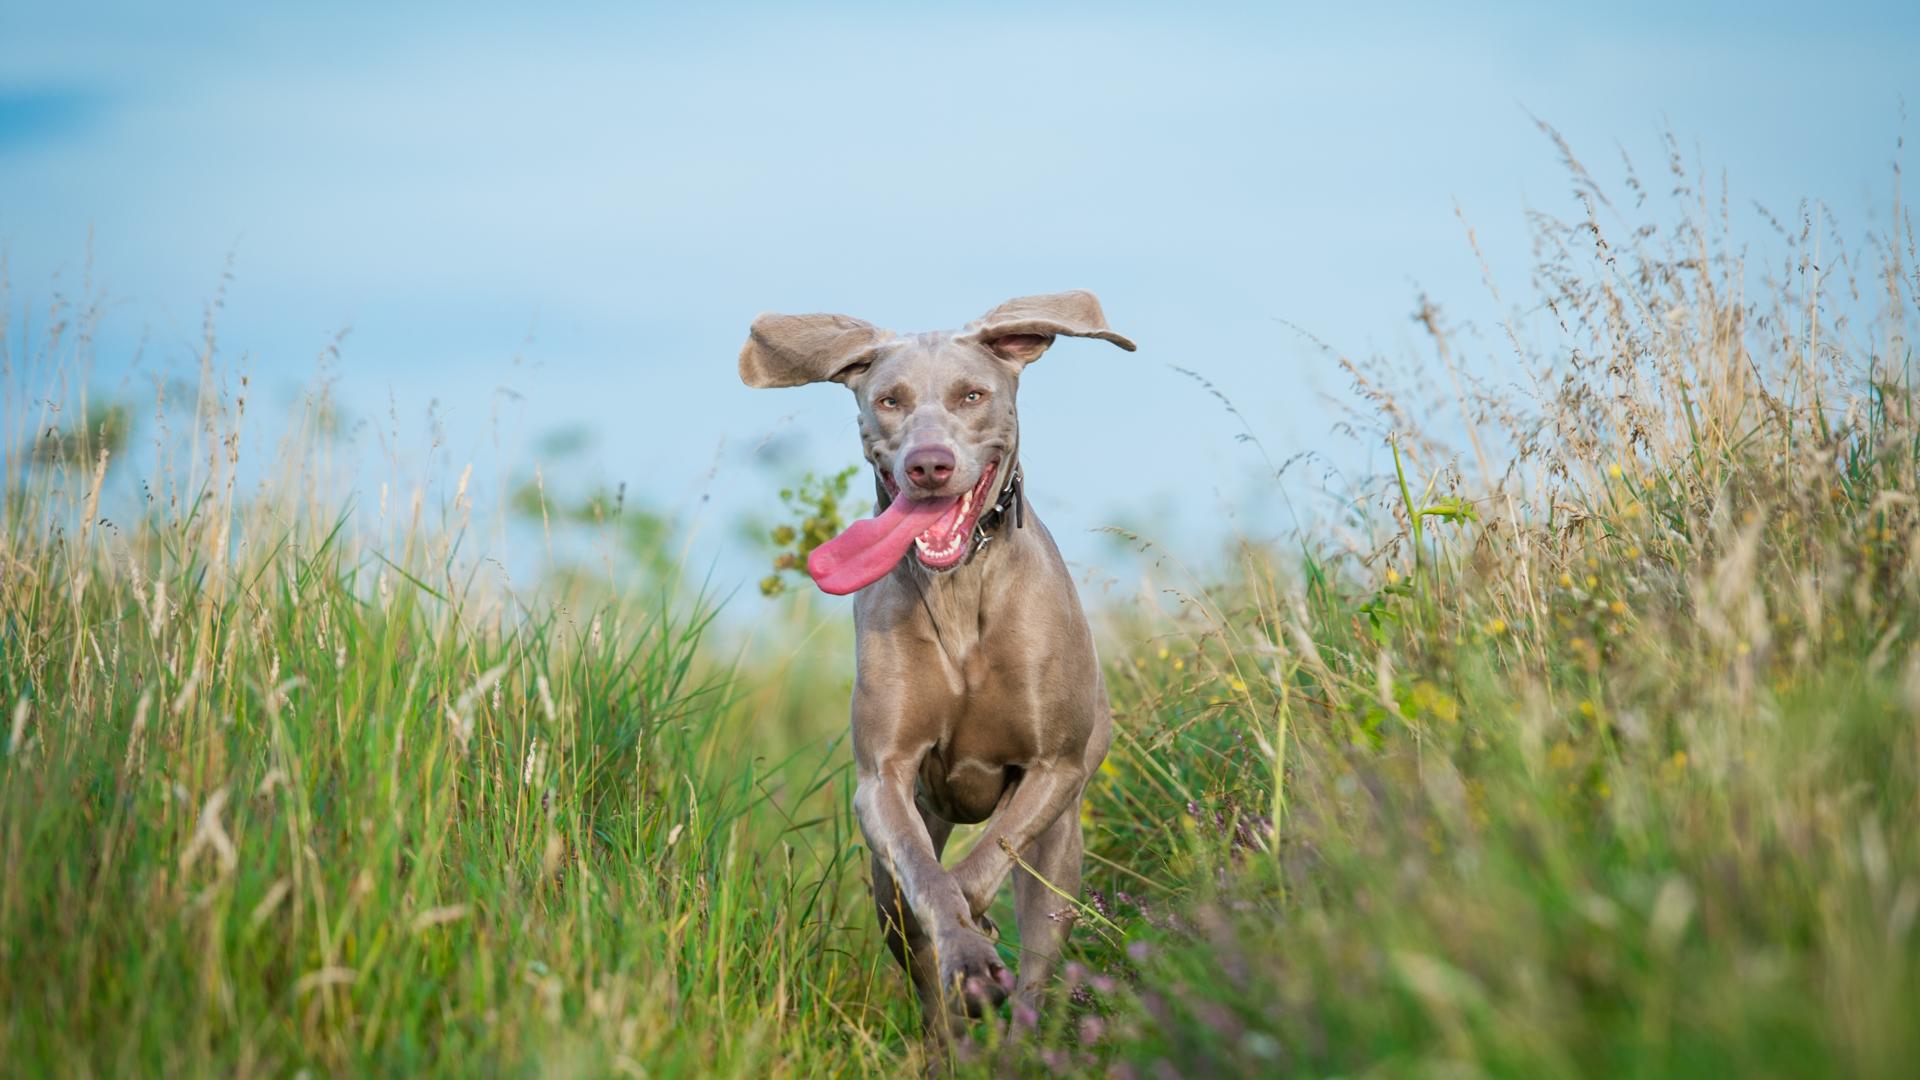 Your best friend will enjoy running and socializing at the Pinnacle dog park